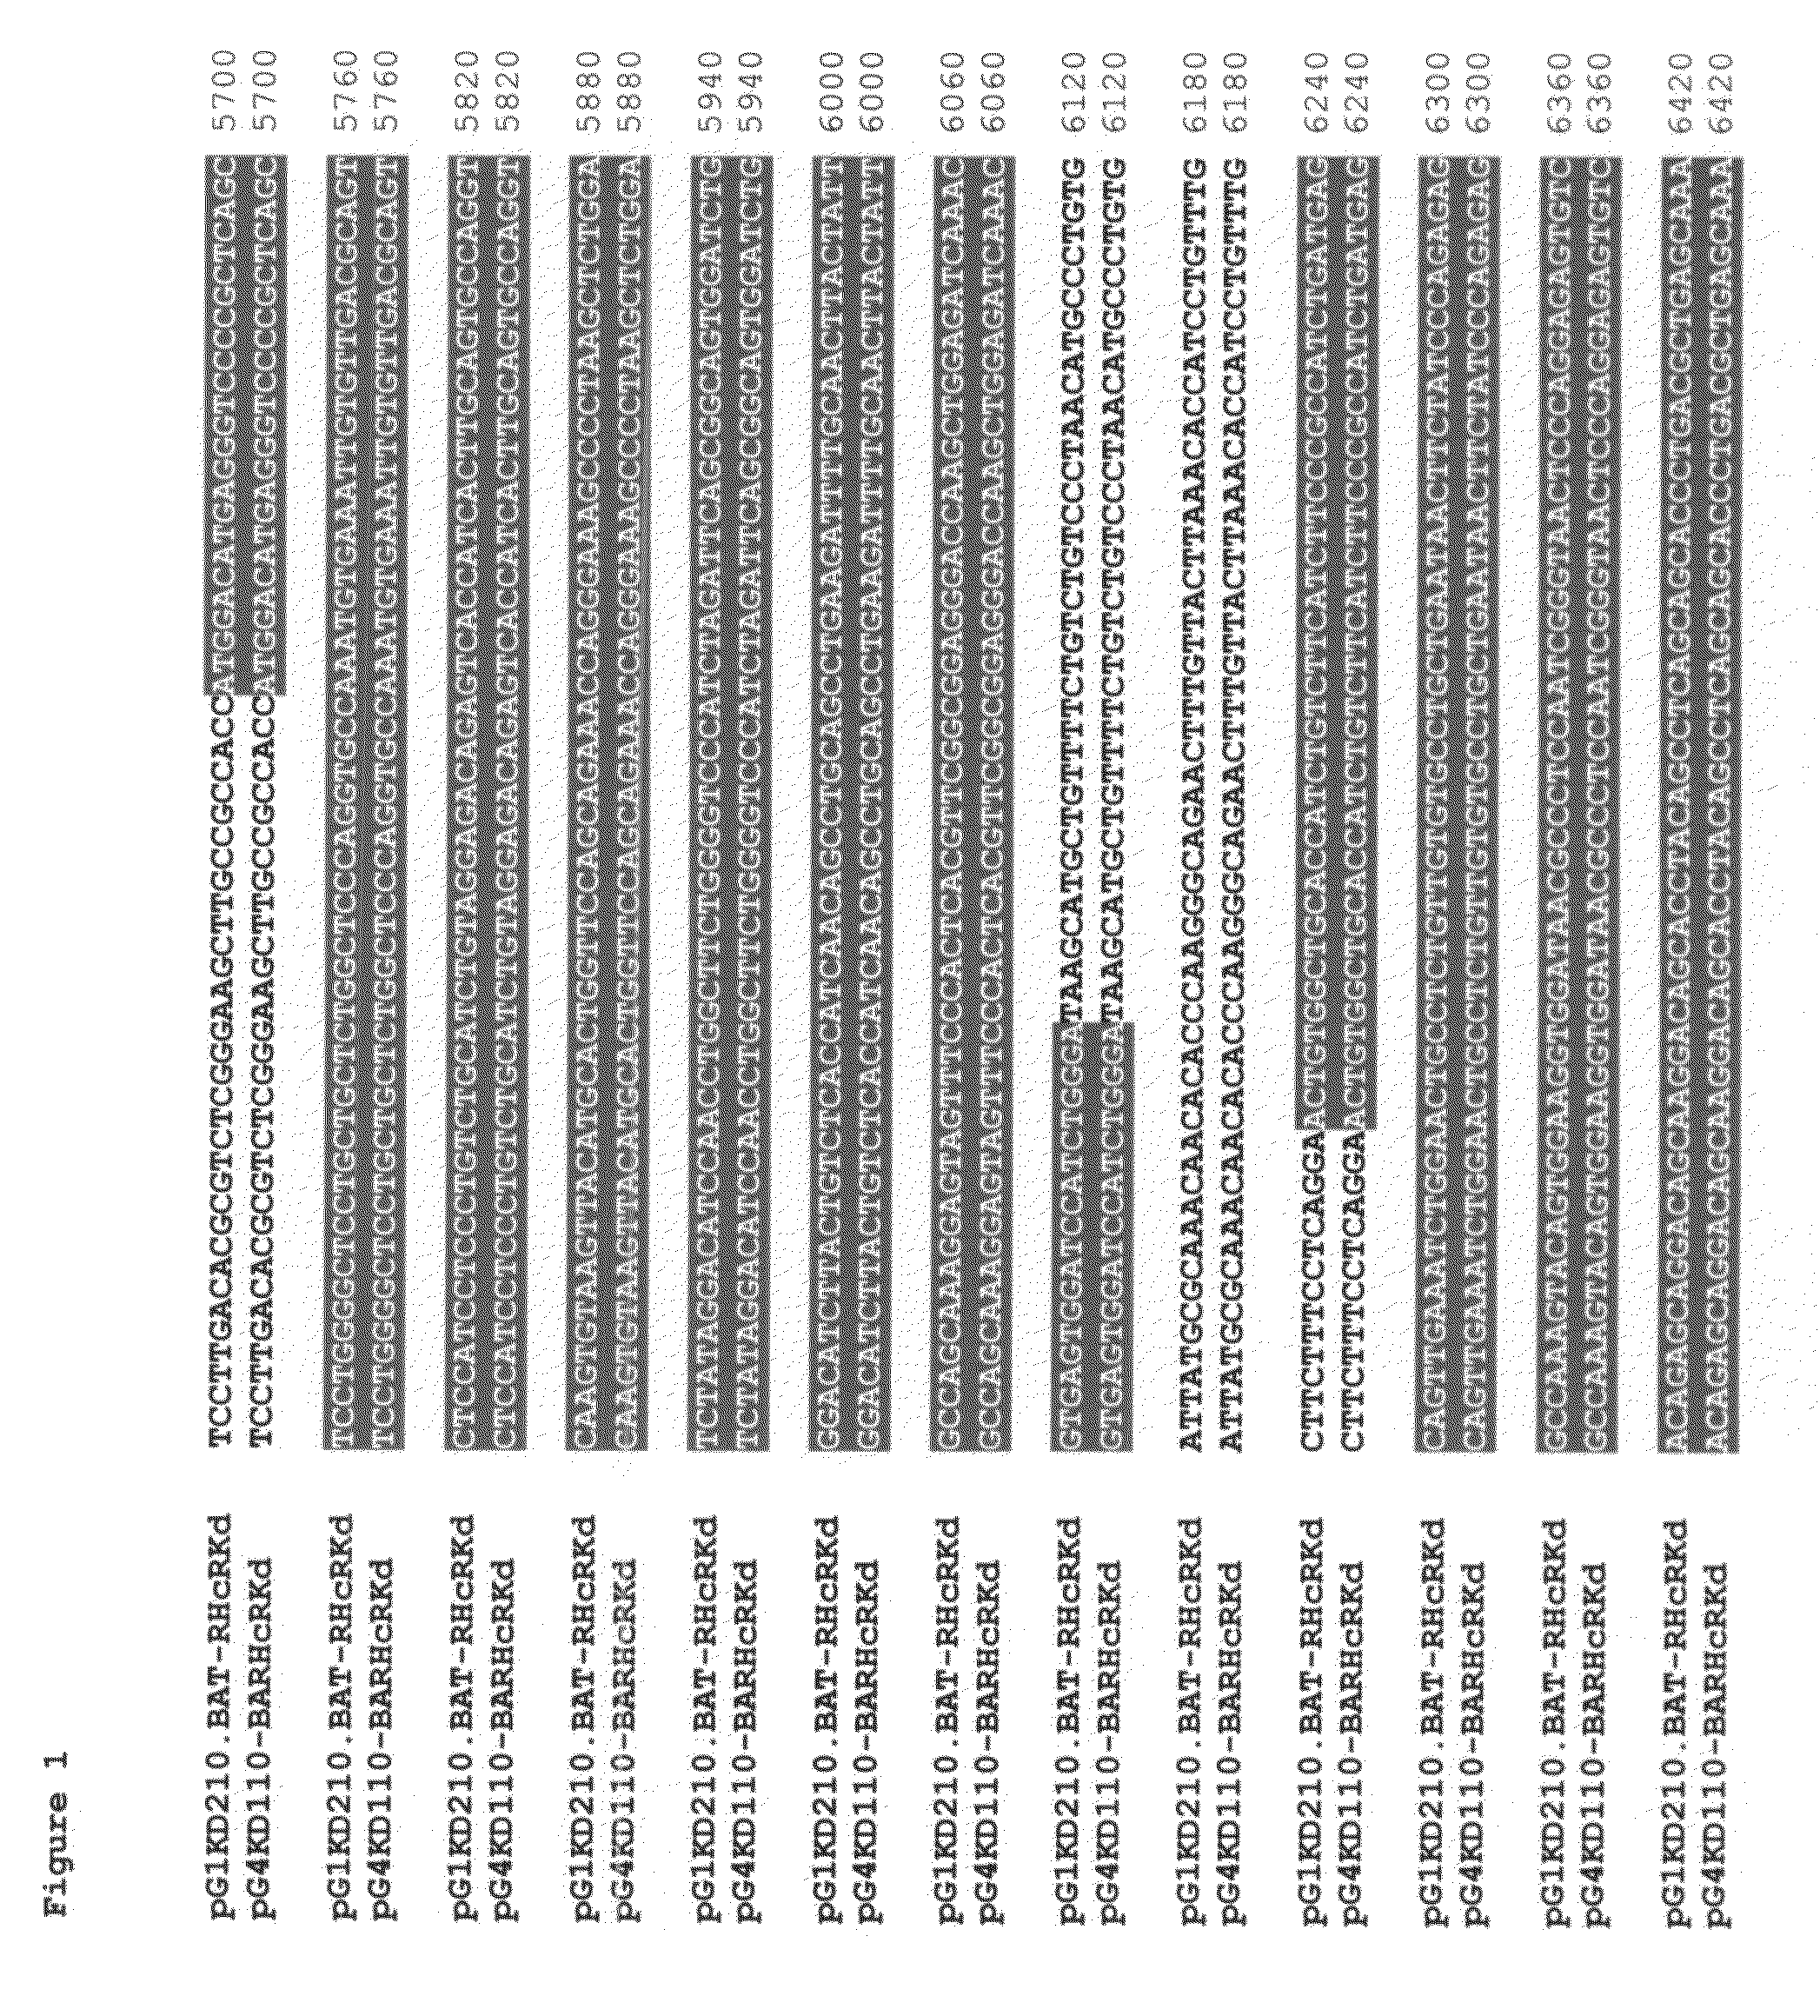 System and method for production of antibodies in plant cell culture